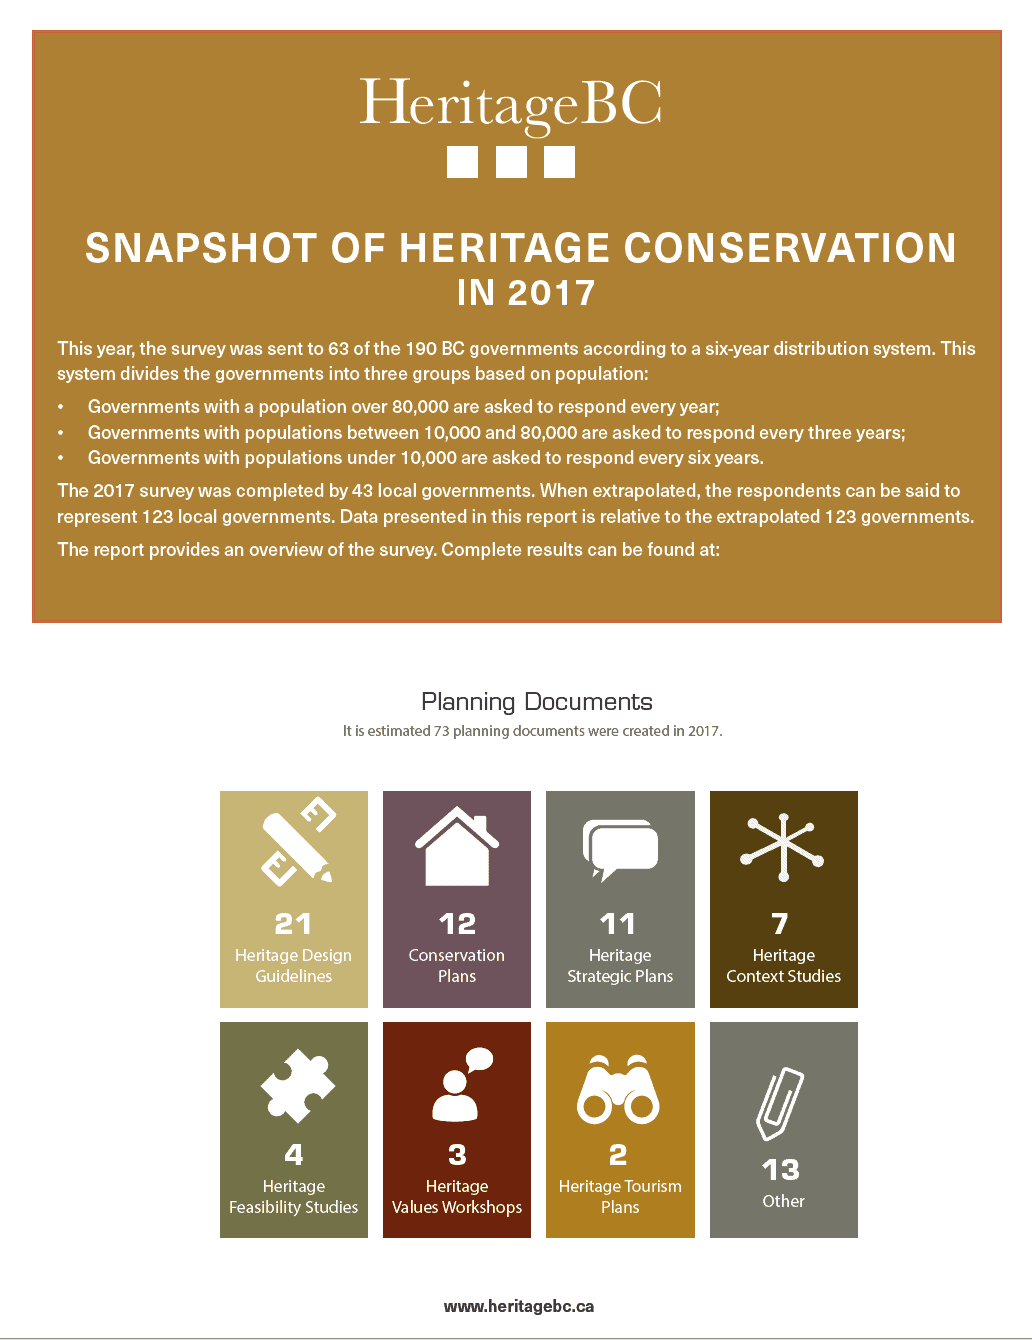 Snapshot of Heritage Conservation in 2017